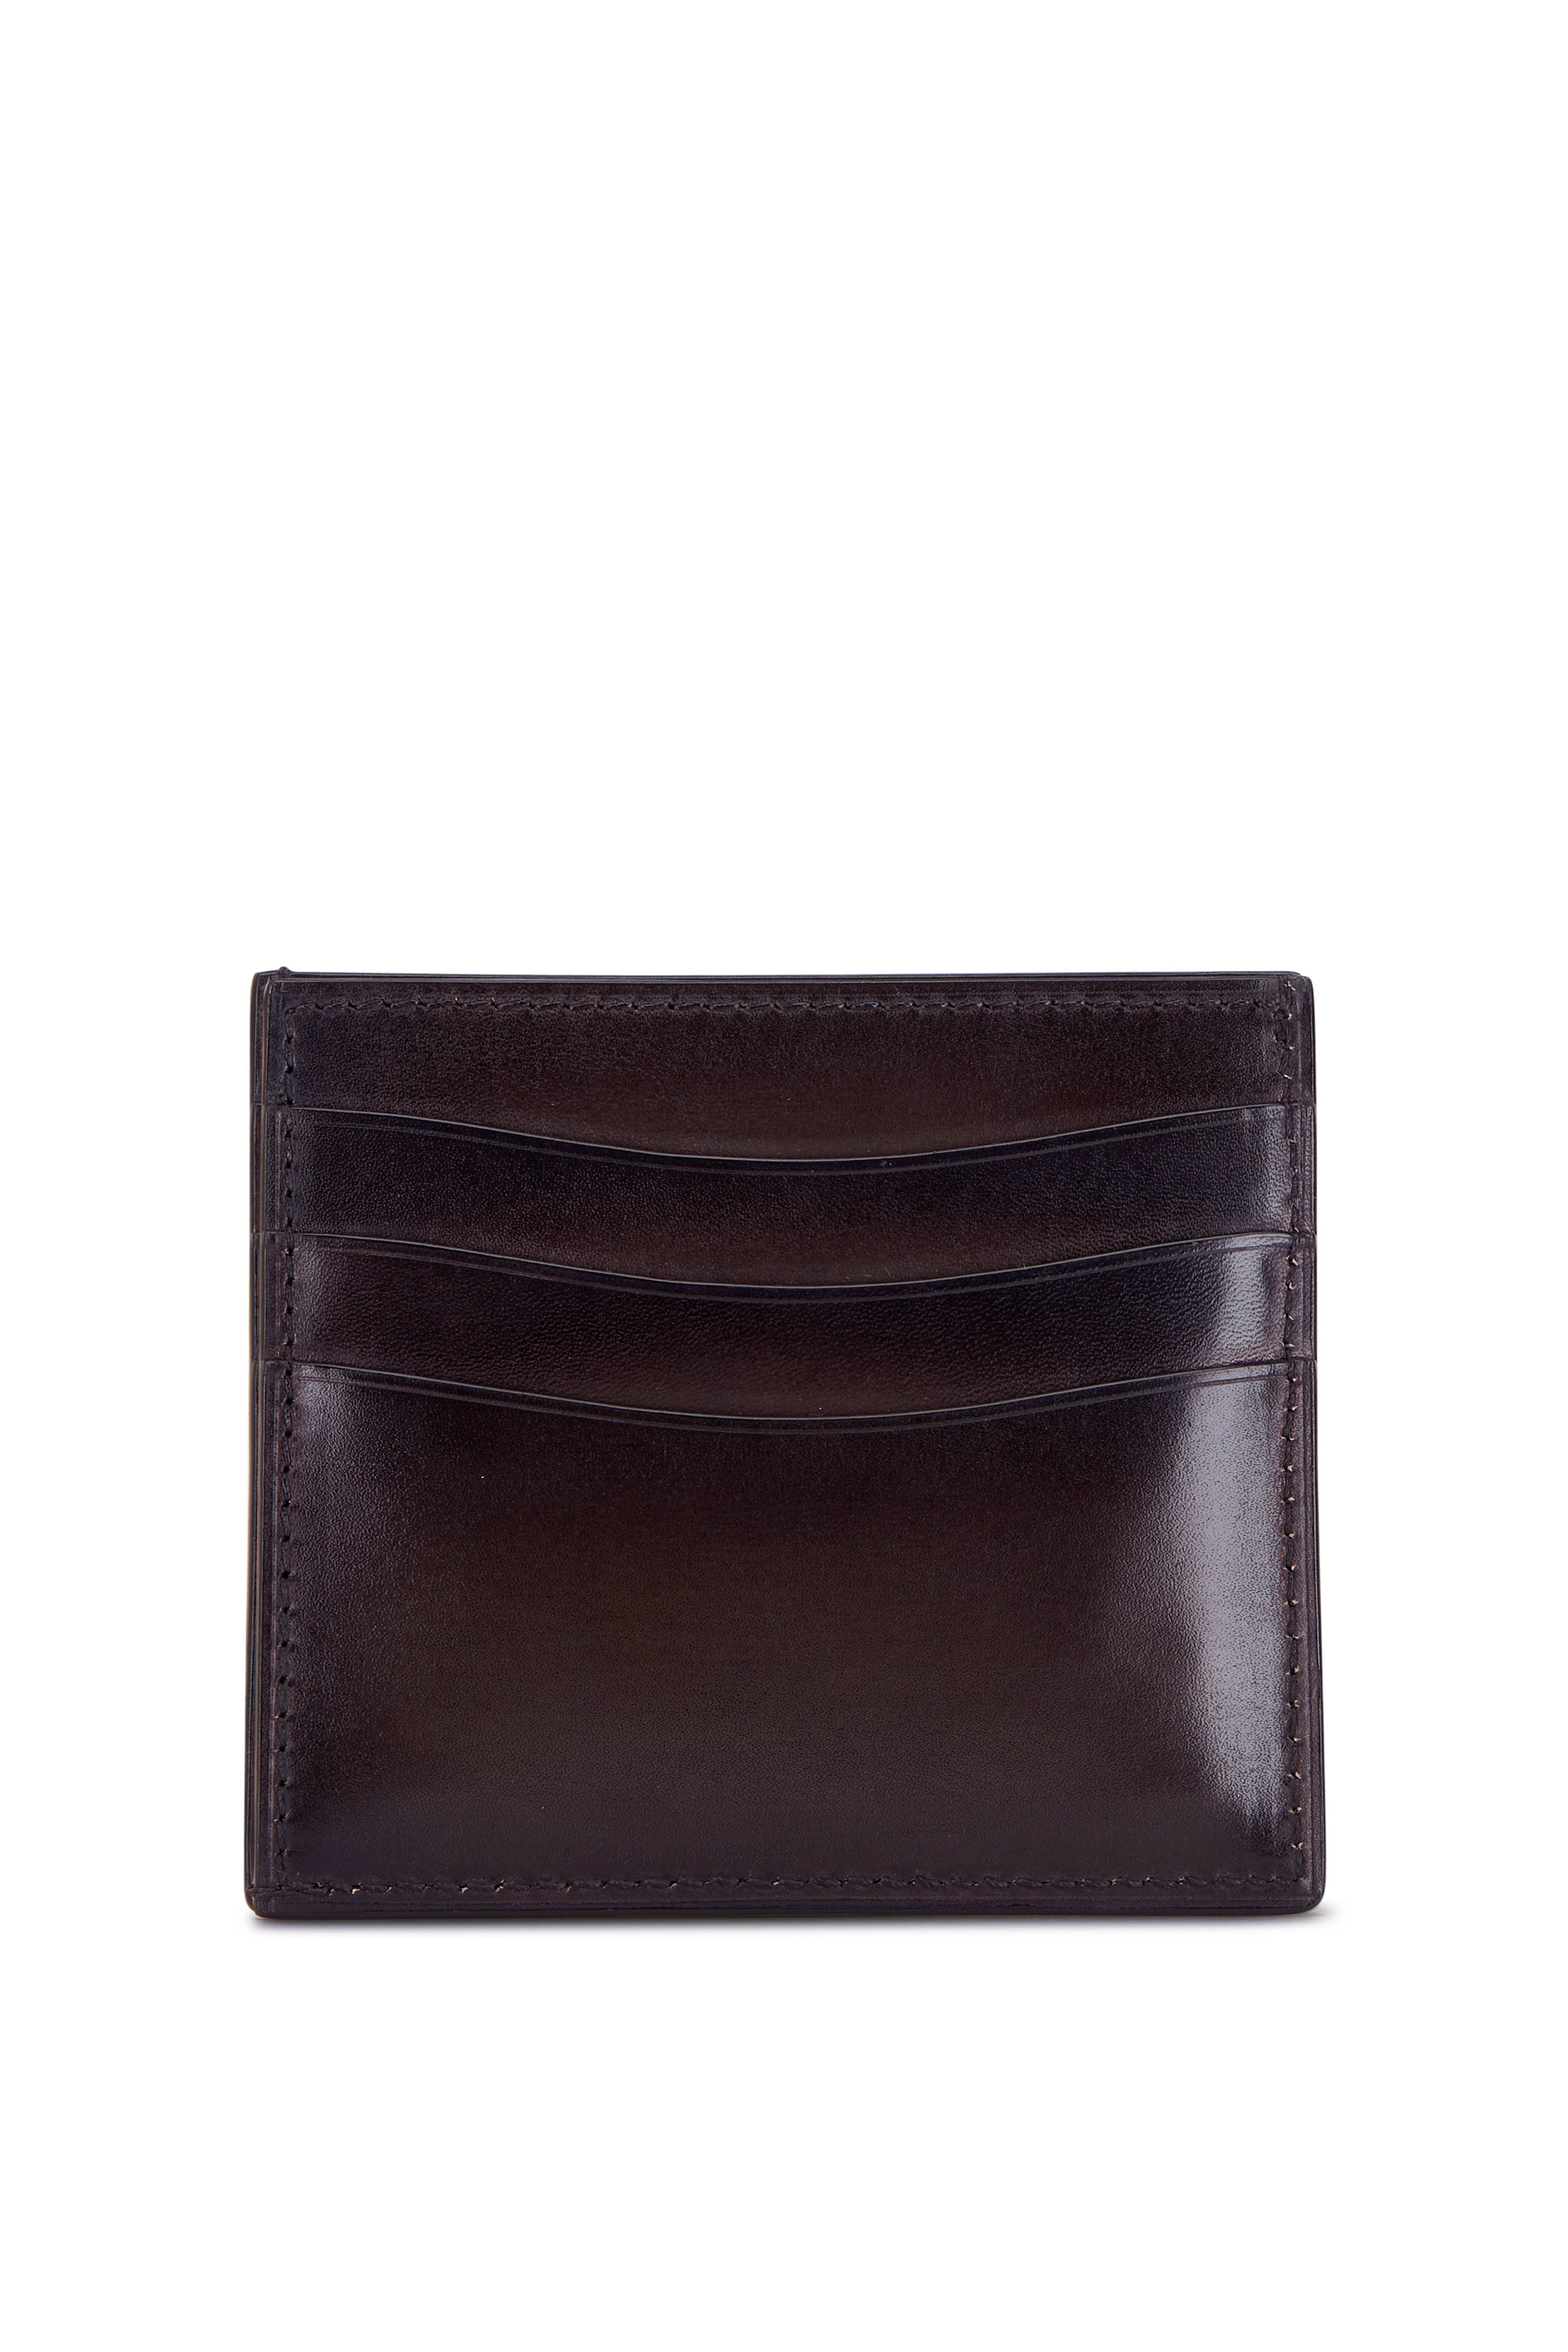 Berluti Men's Bambou Neo Scritto Card Case, Mimosa, Men's, Small Leather Goods Card Cases & Card Holders